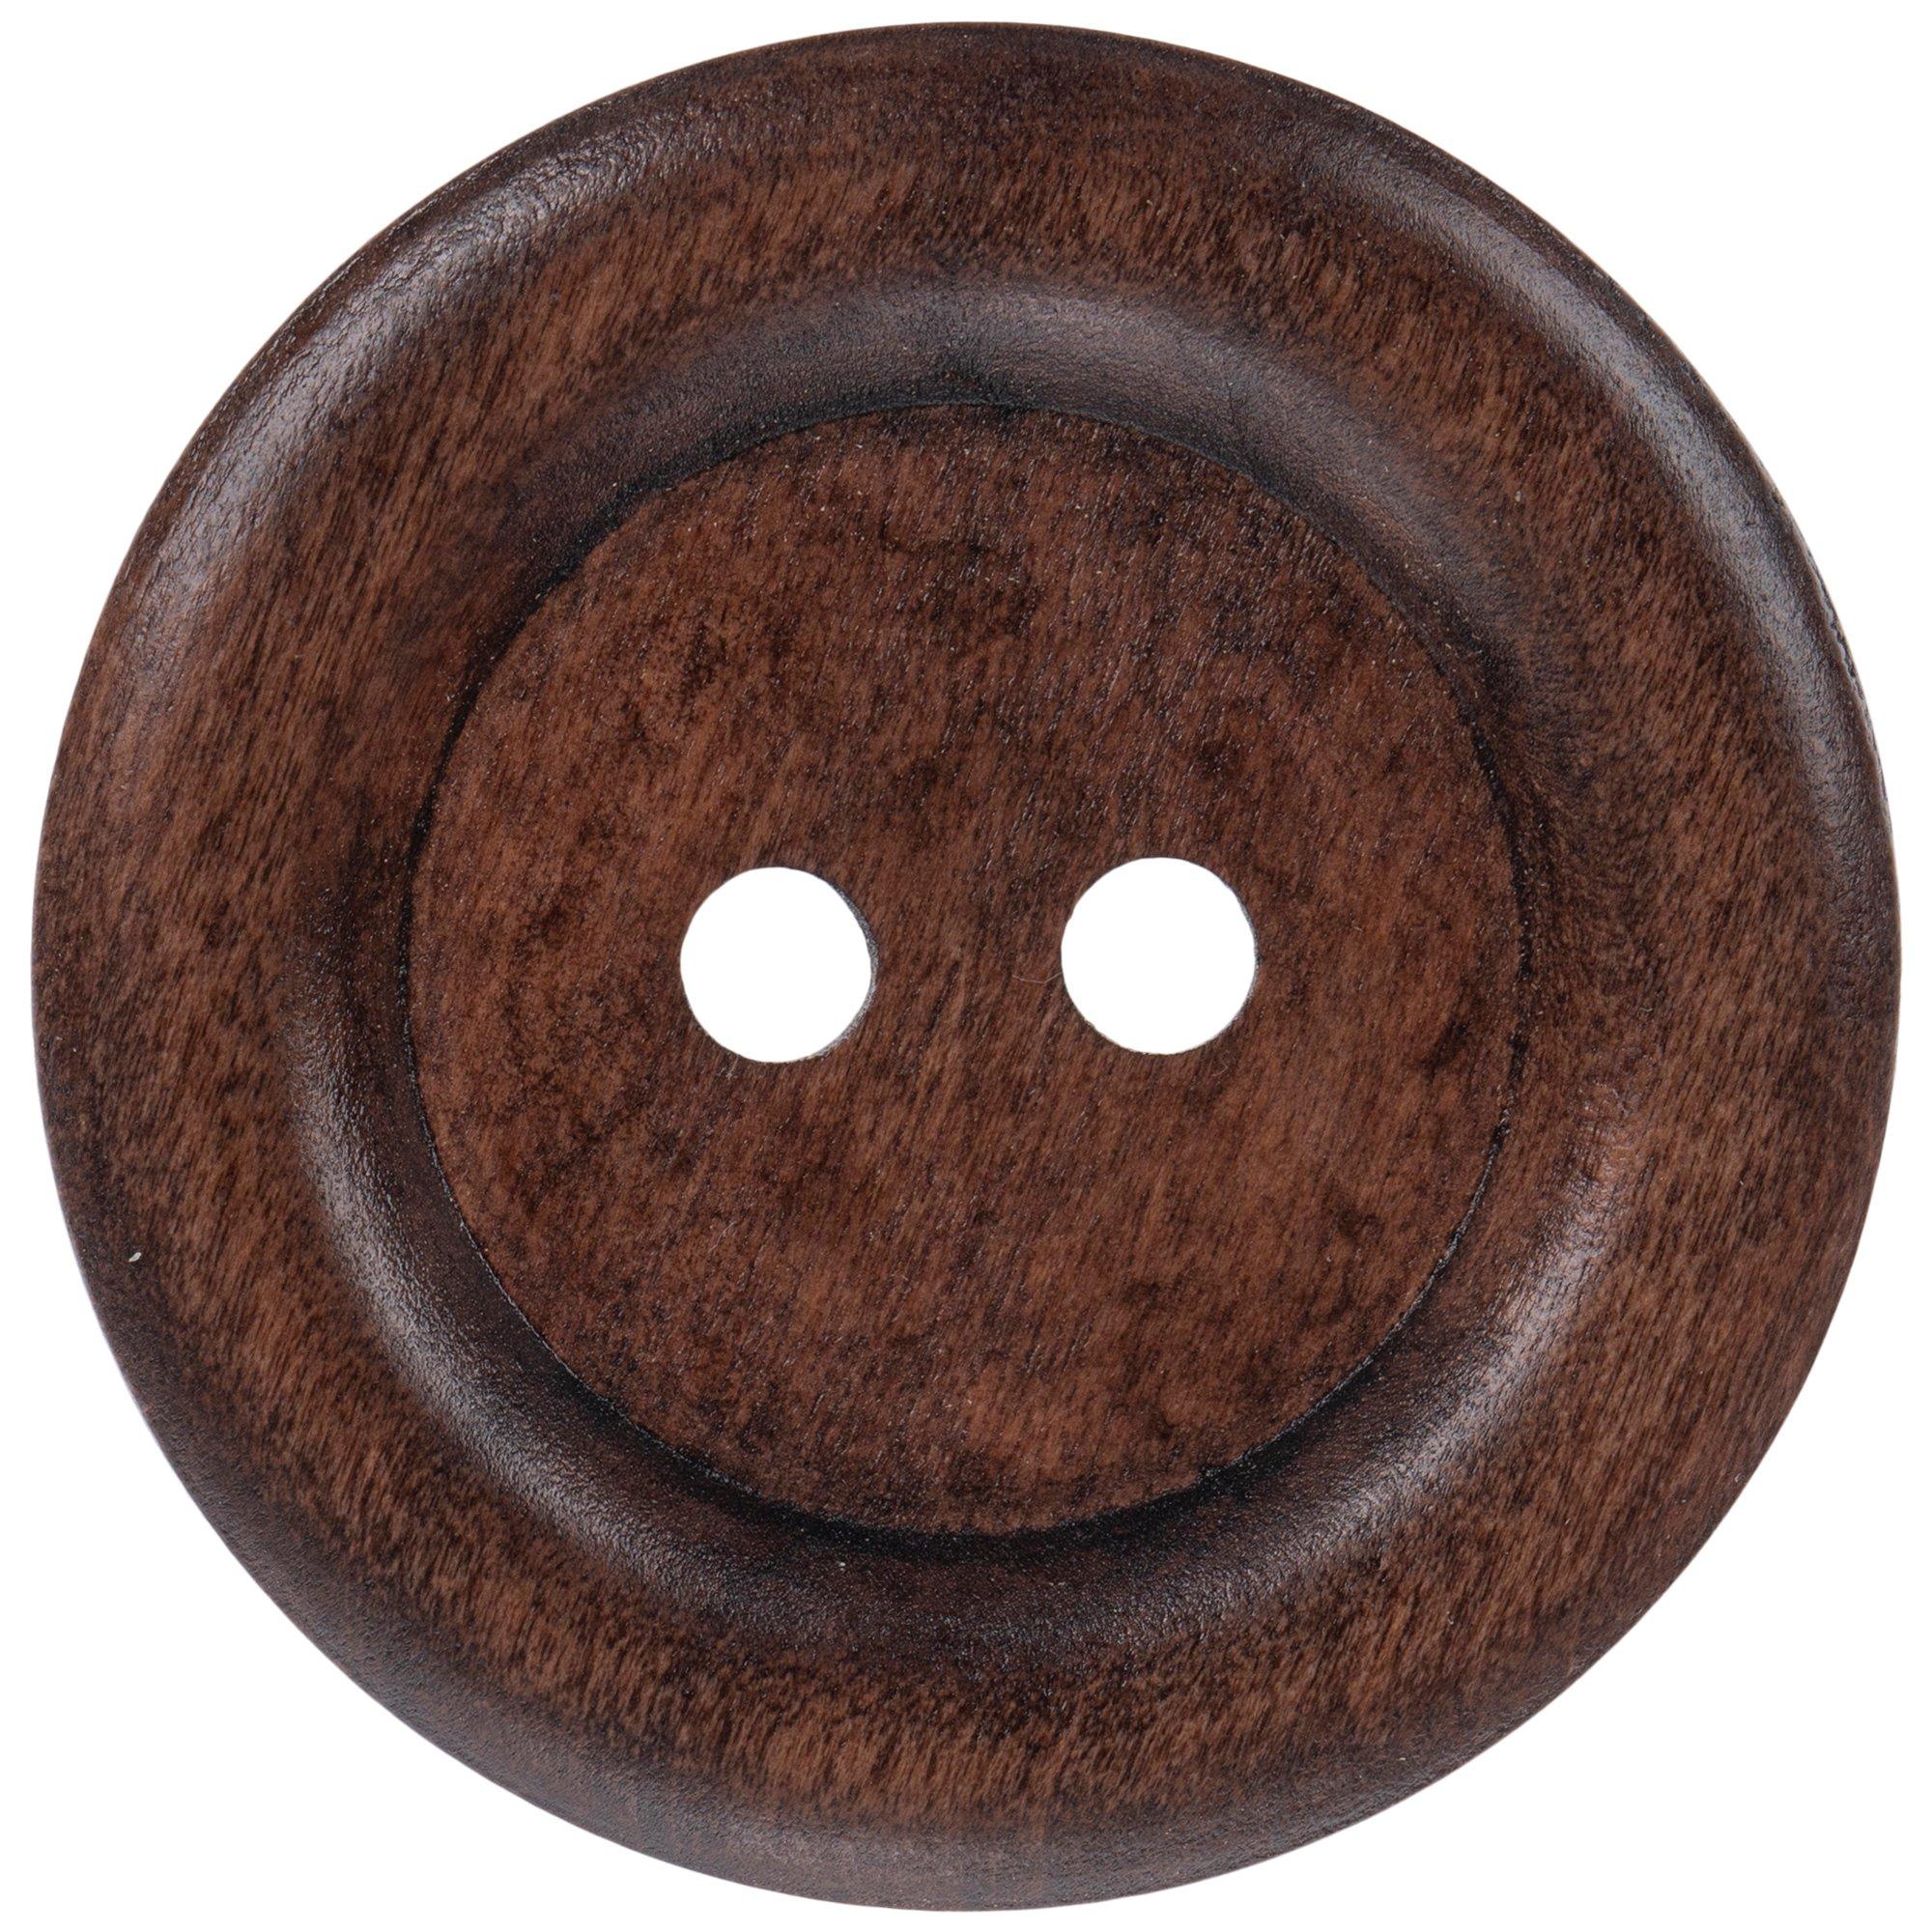 Large Round Wooden Button – Field & Cloth